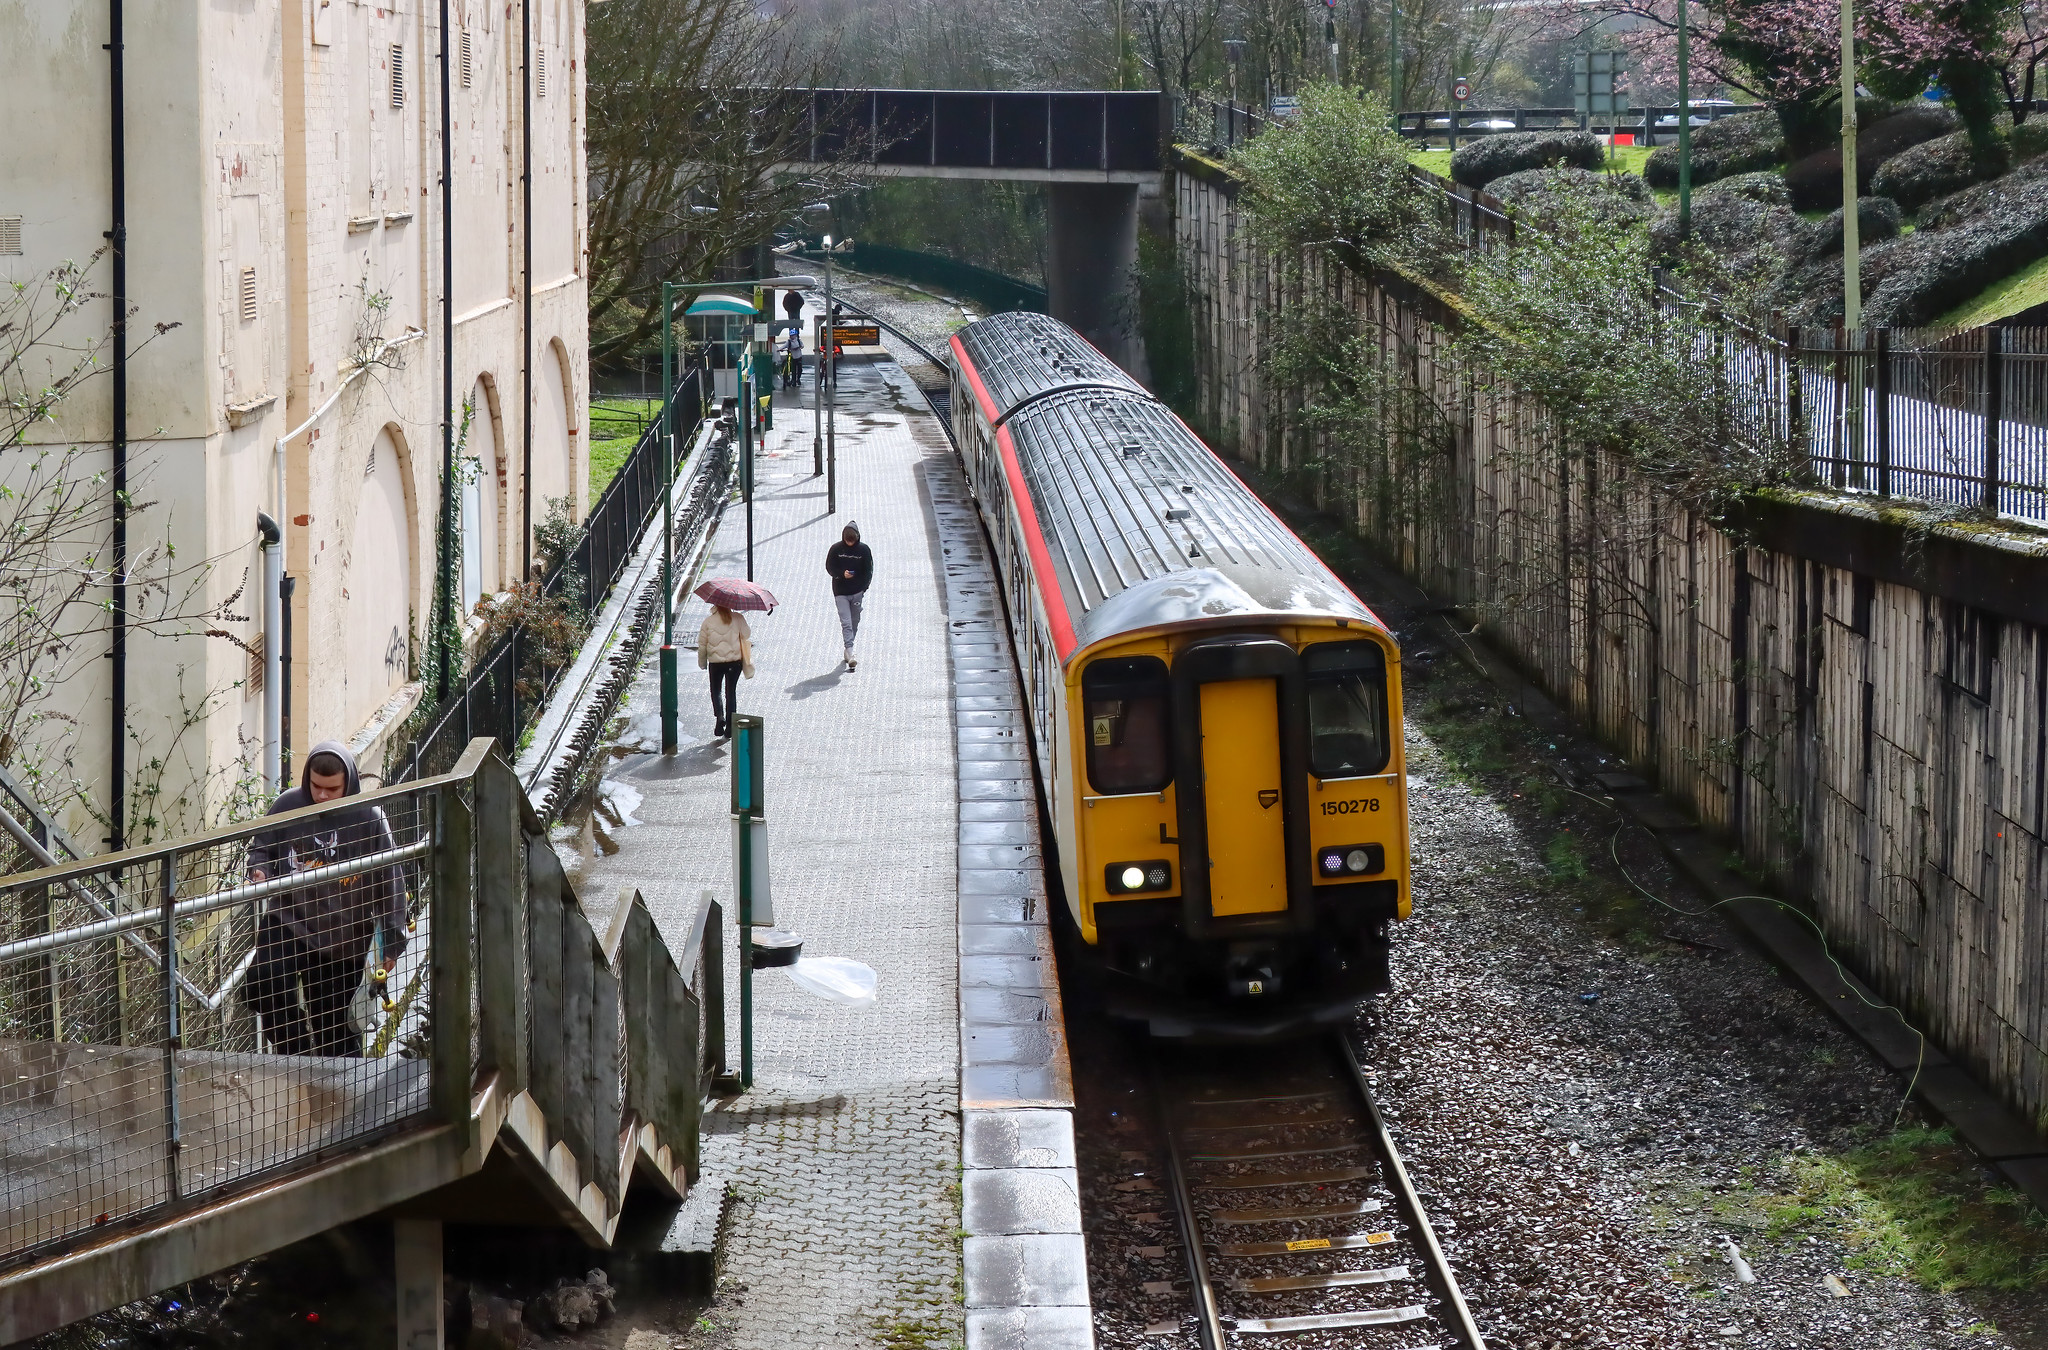 A train stops in Tonypandy station.